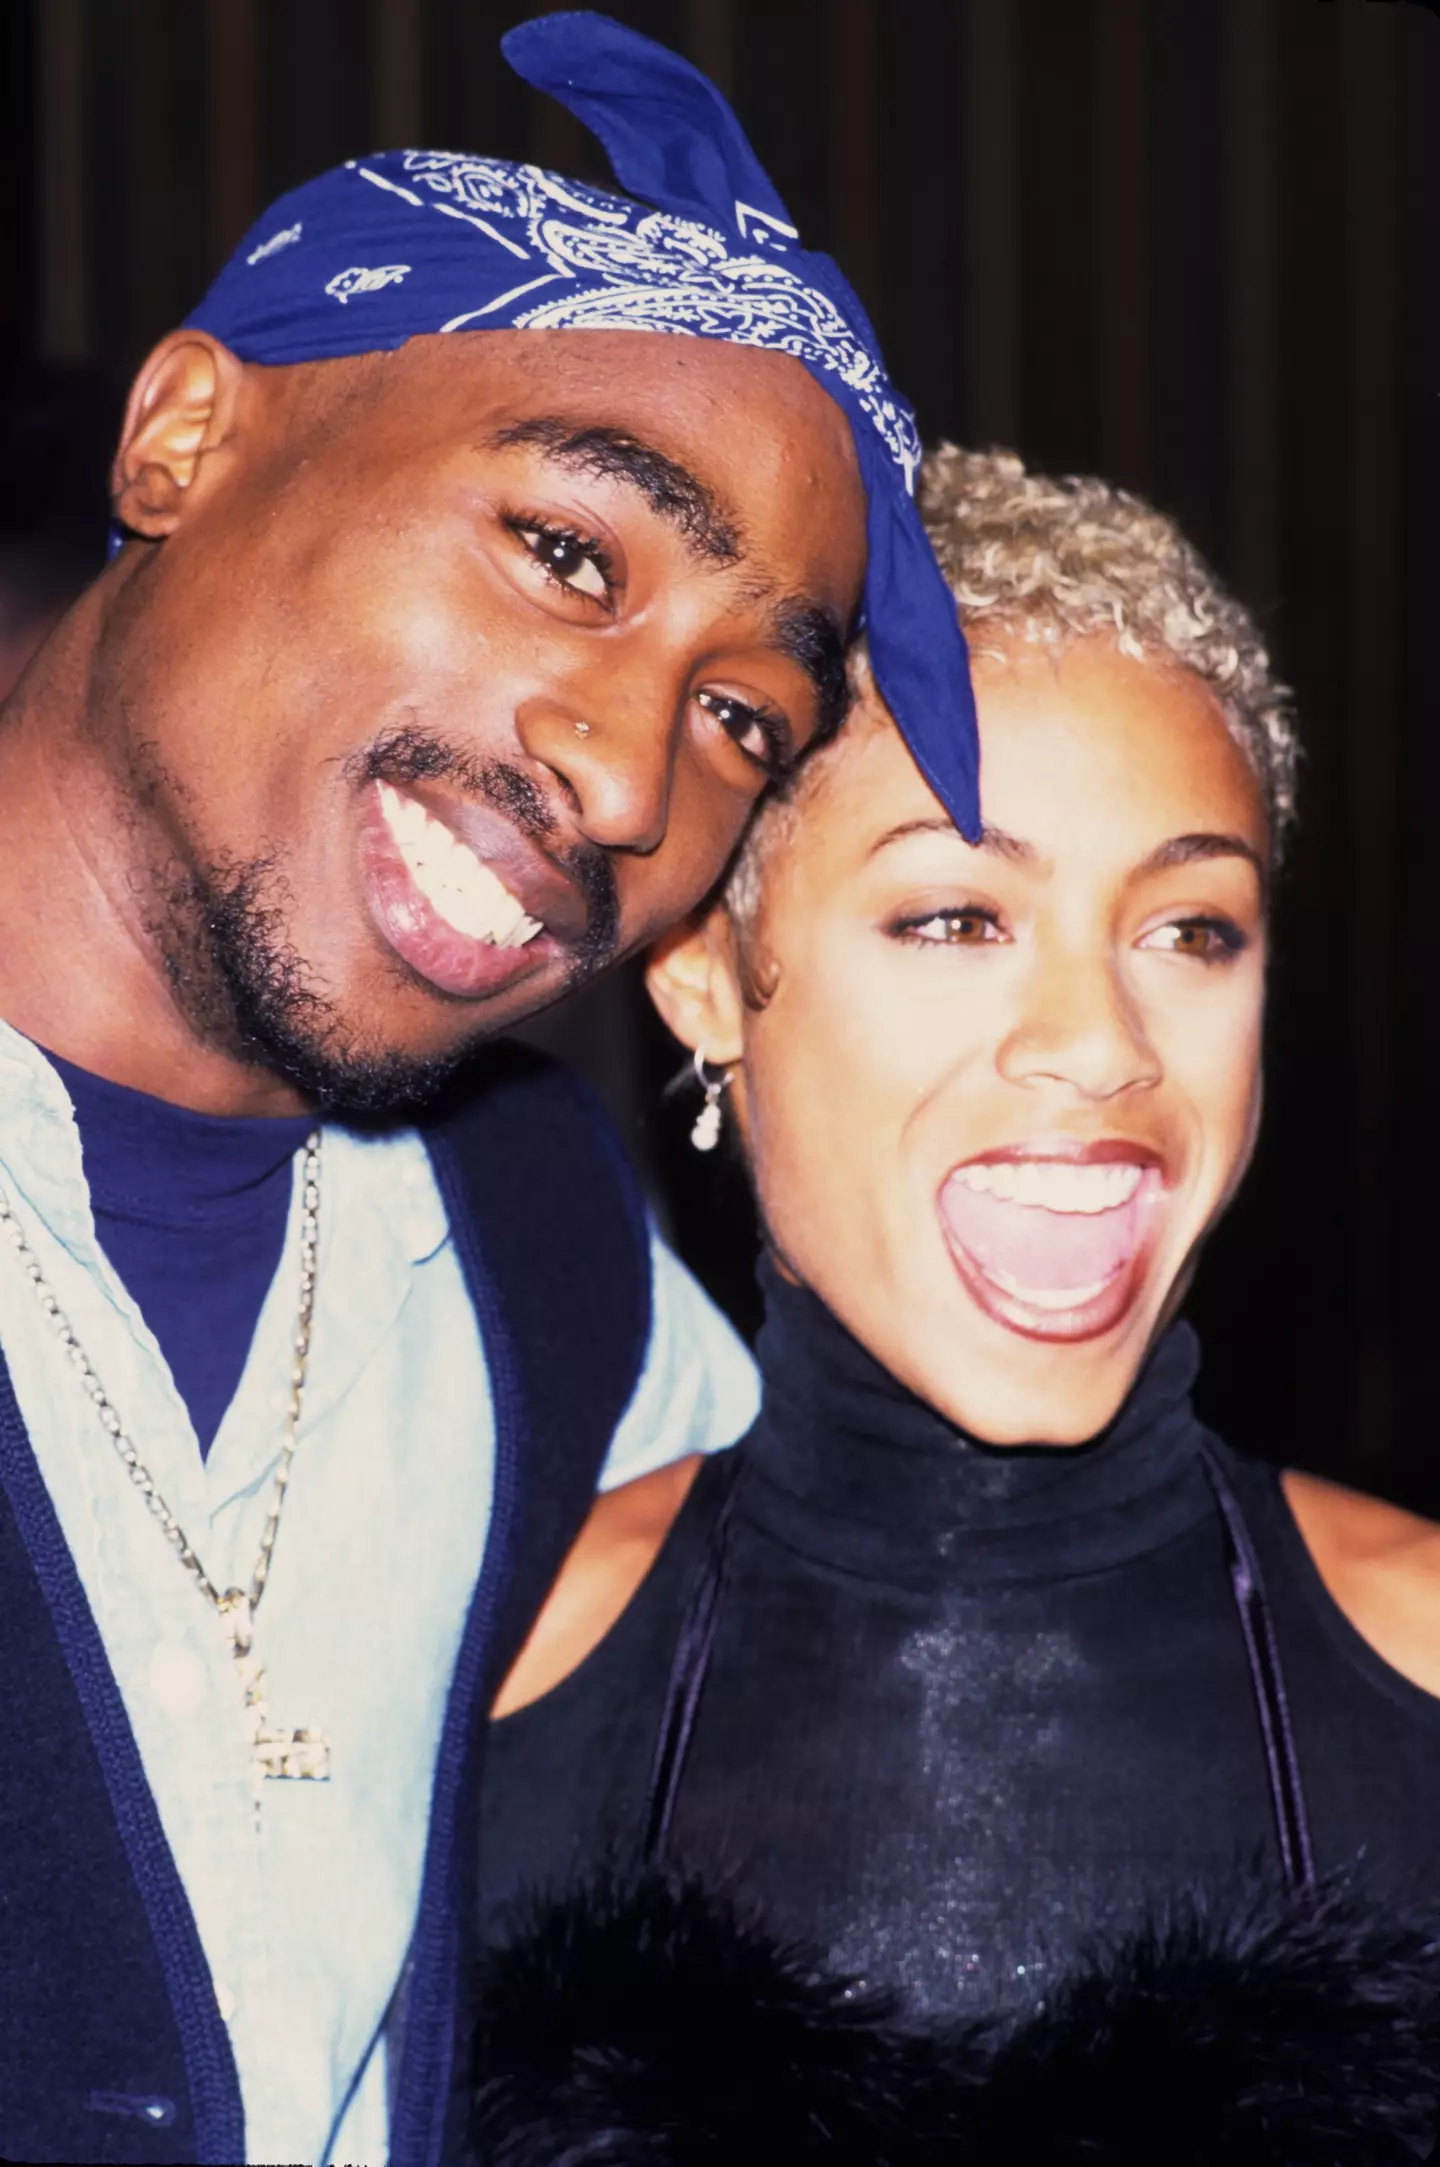 Jada Pinkett Smith has issued a brief statement following the Tupac Shakur shooting suspect arrest.